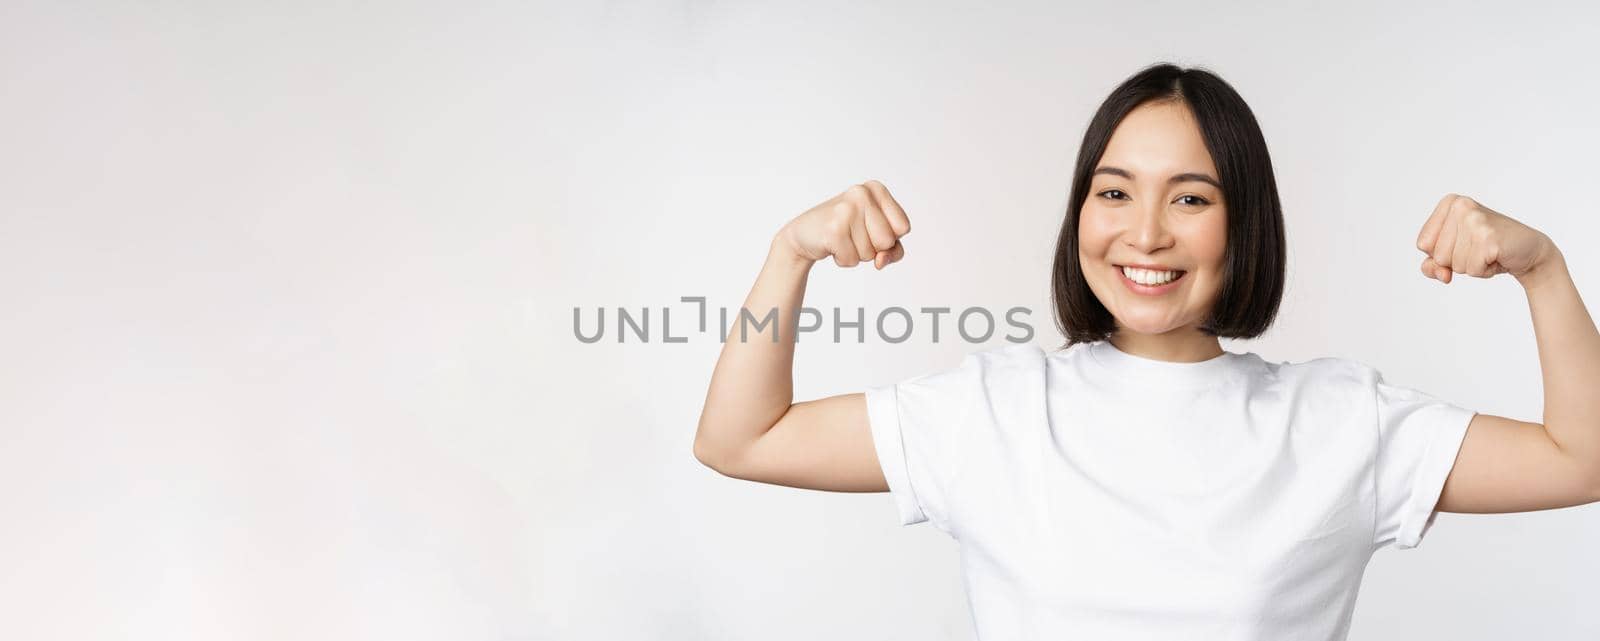 Smiling asian woman showing flexing biceps, muscles strong arms gesture, standing in white tshirt over white background.